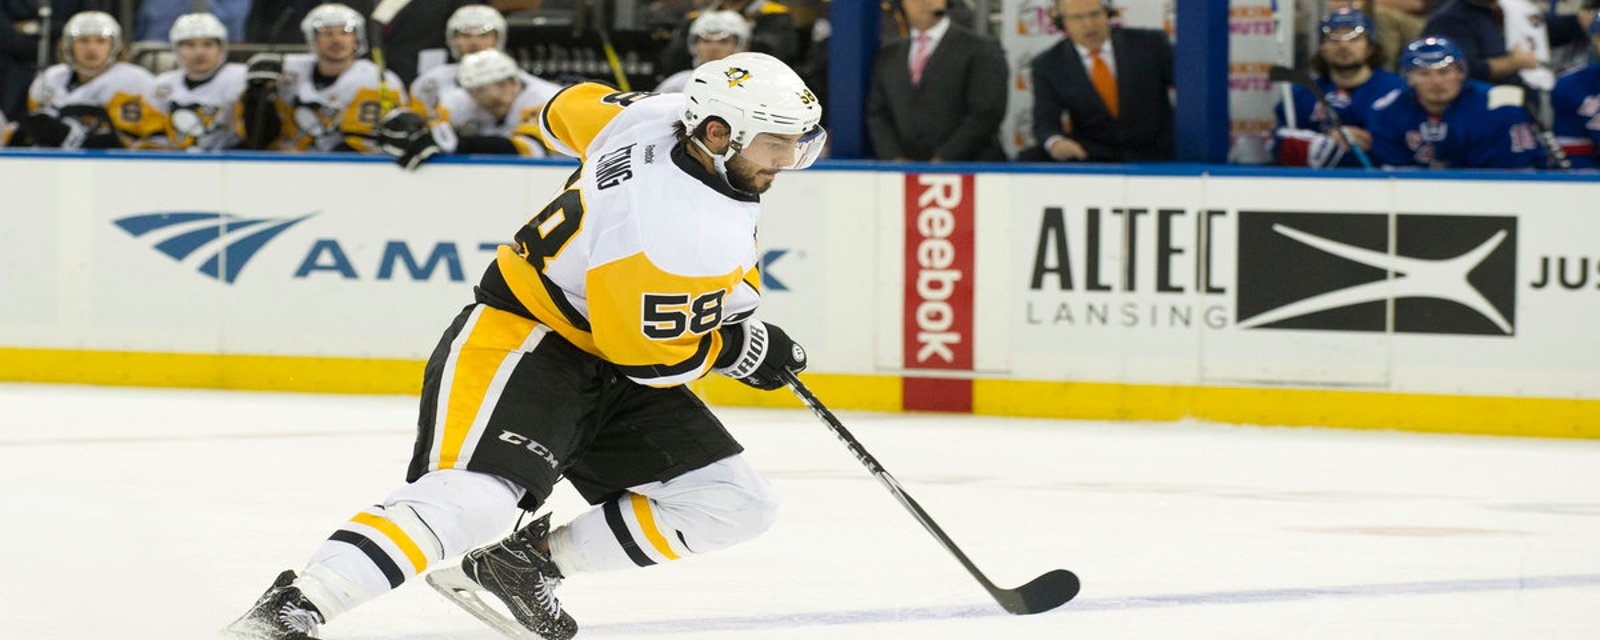 Positive update concerning Letang's injury. 